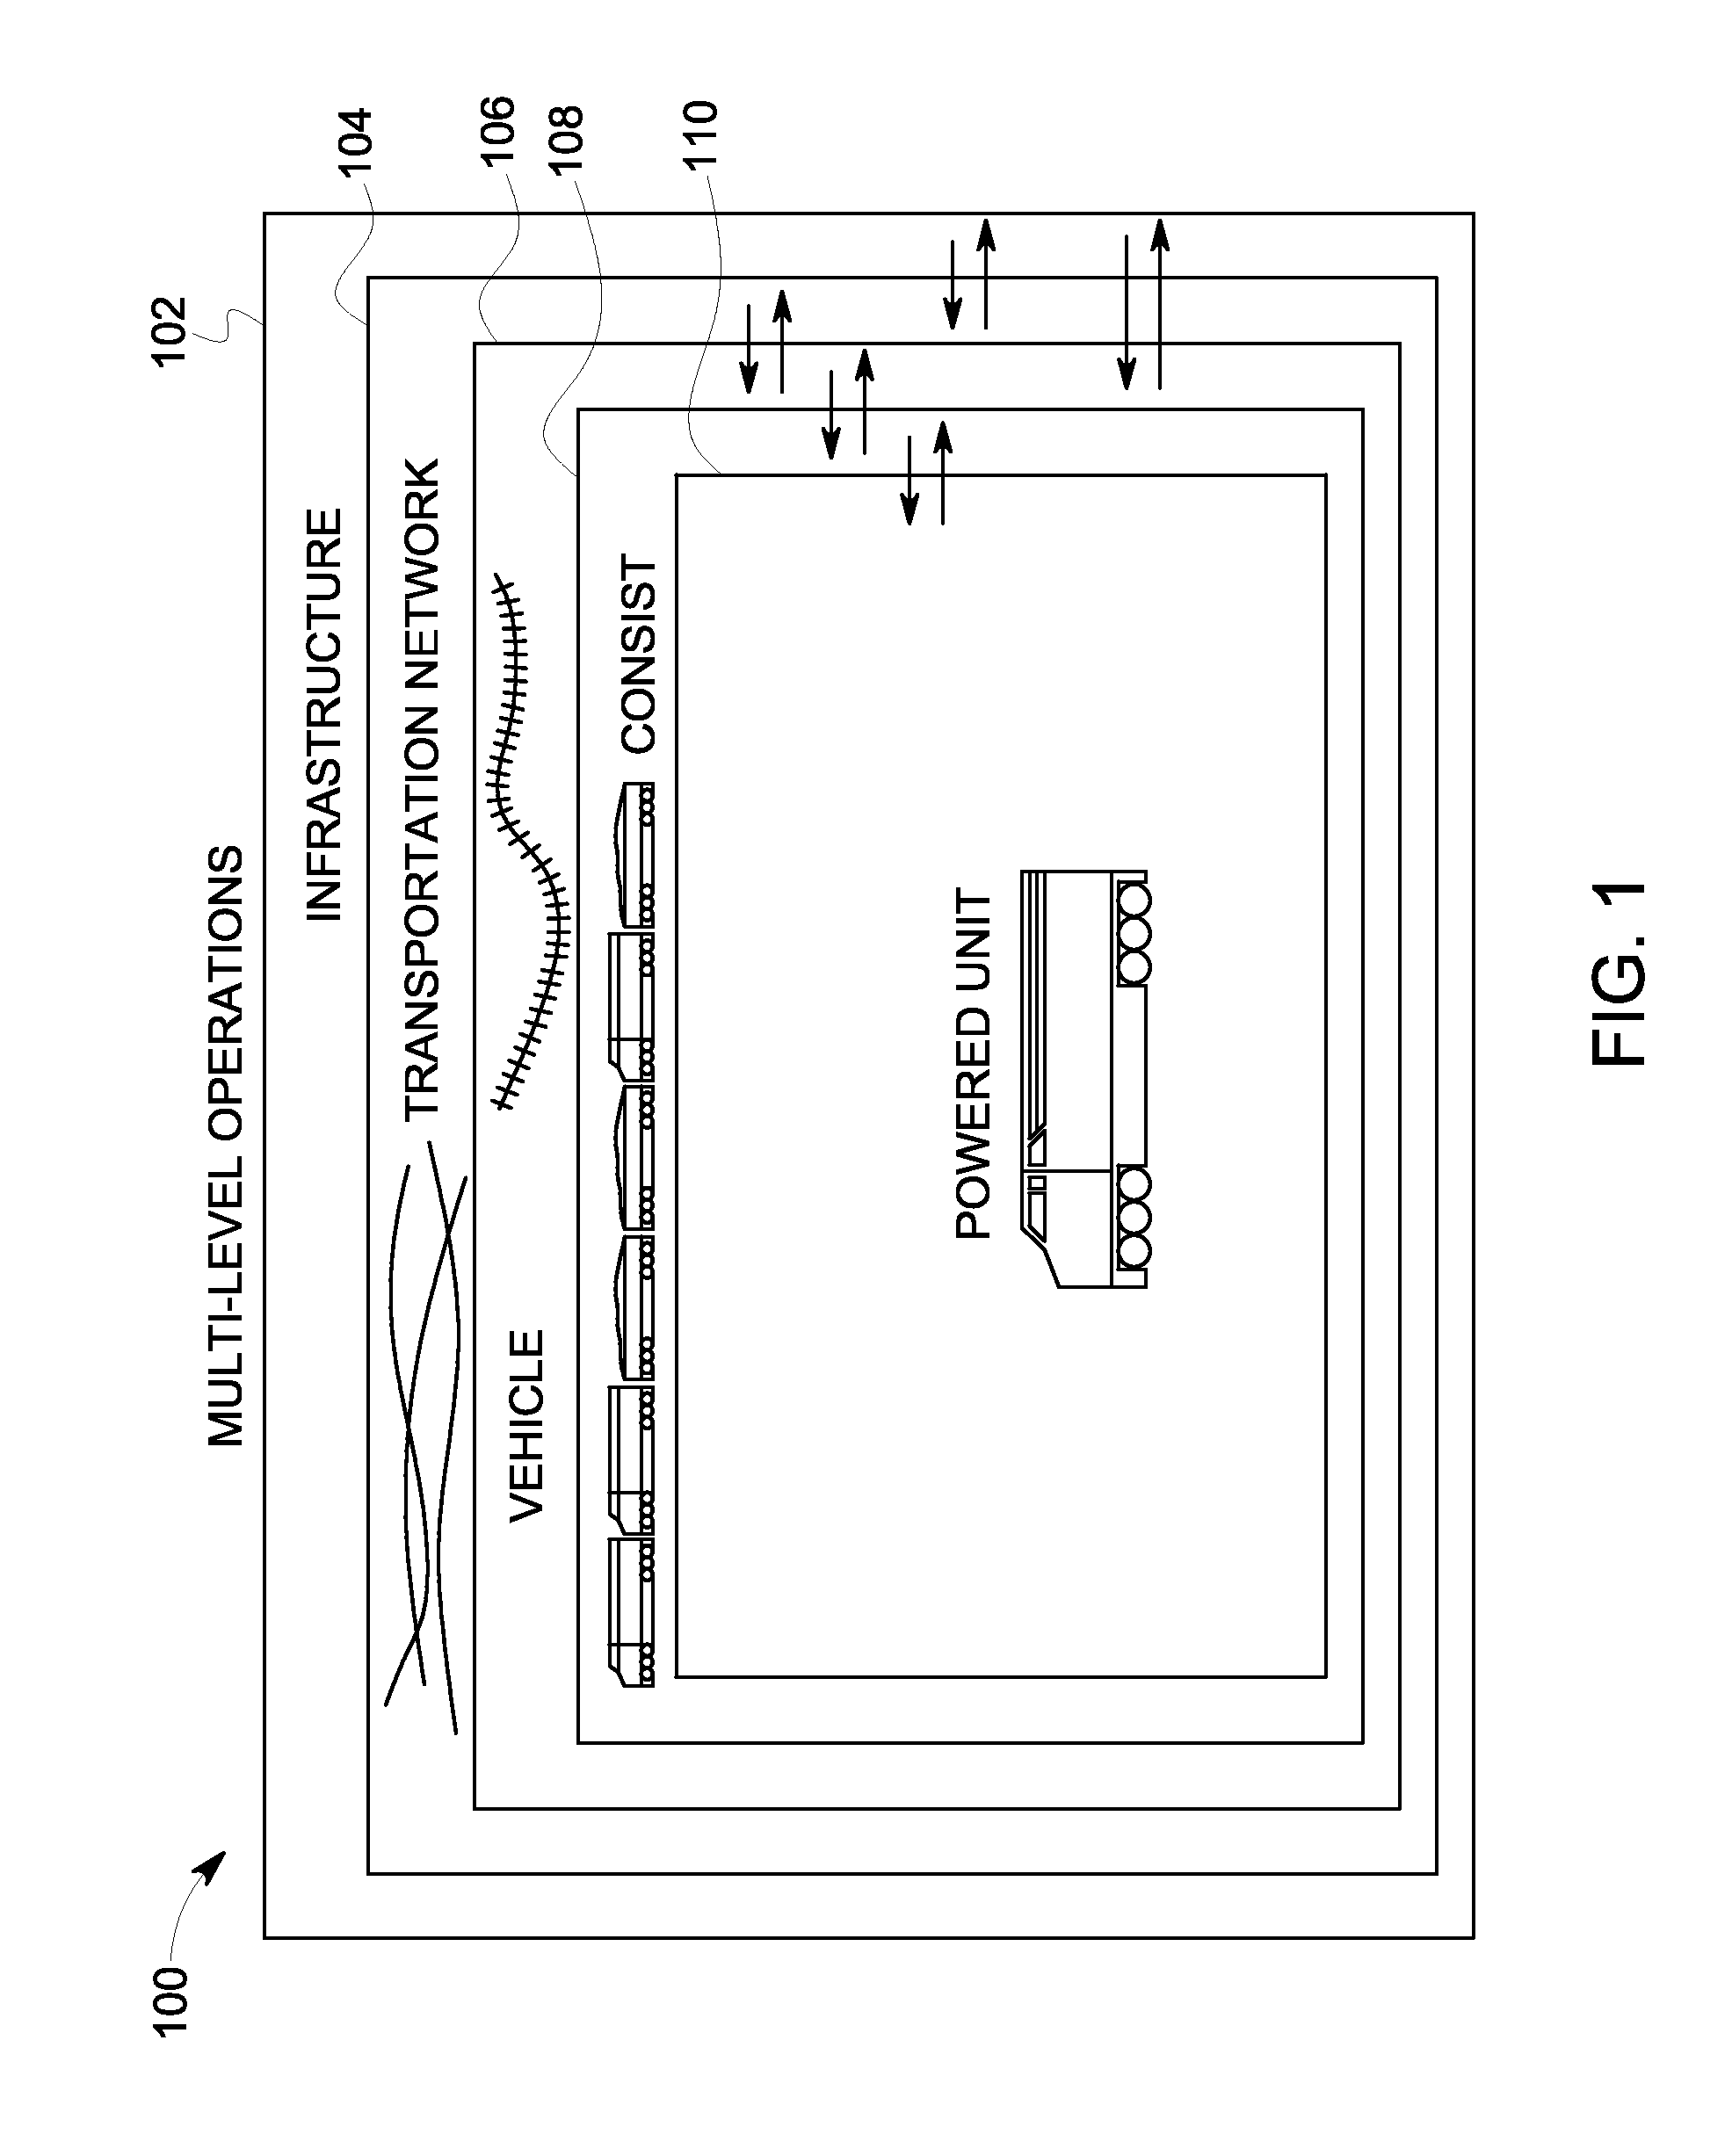 System and method for controlling movement of vehicles